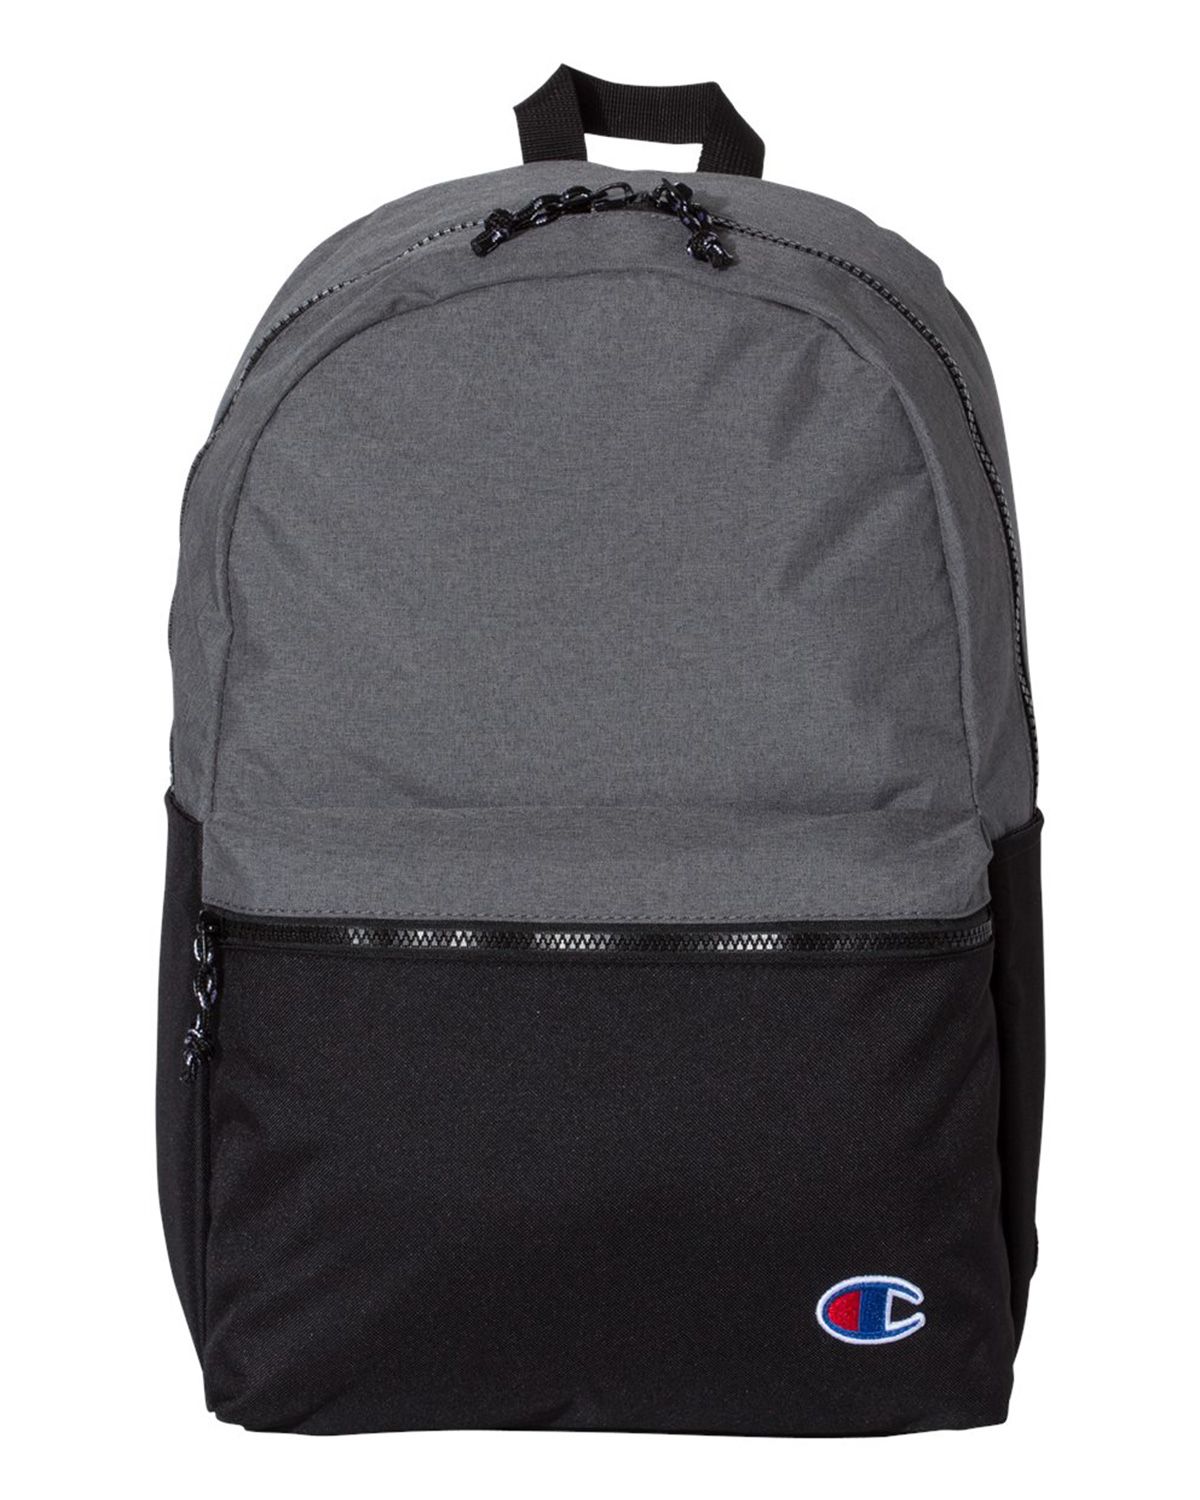 champion laptop backpack